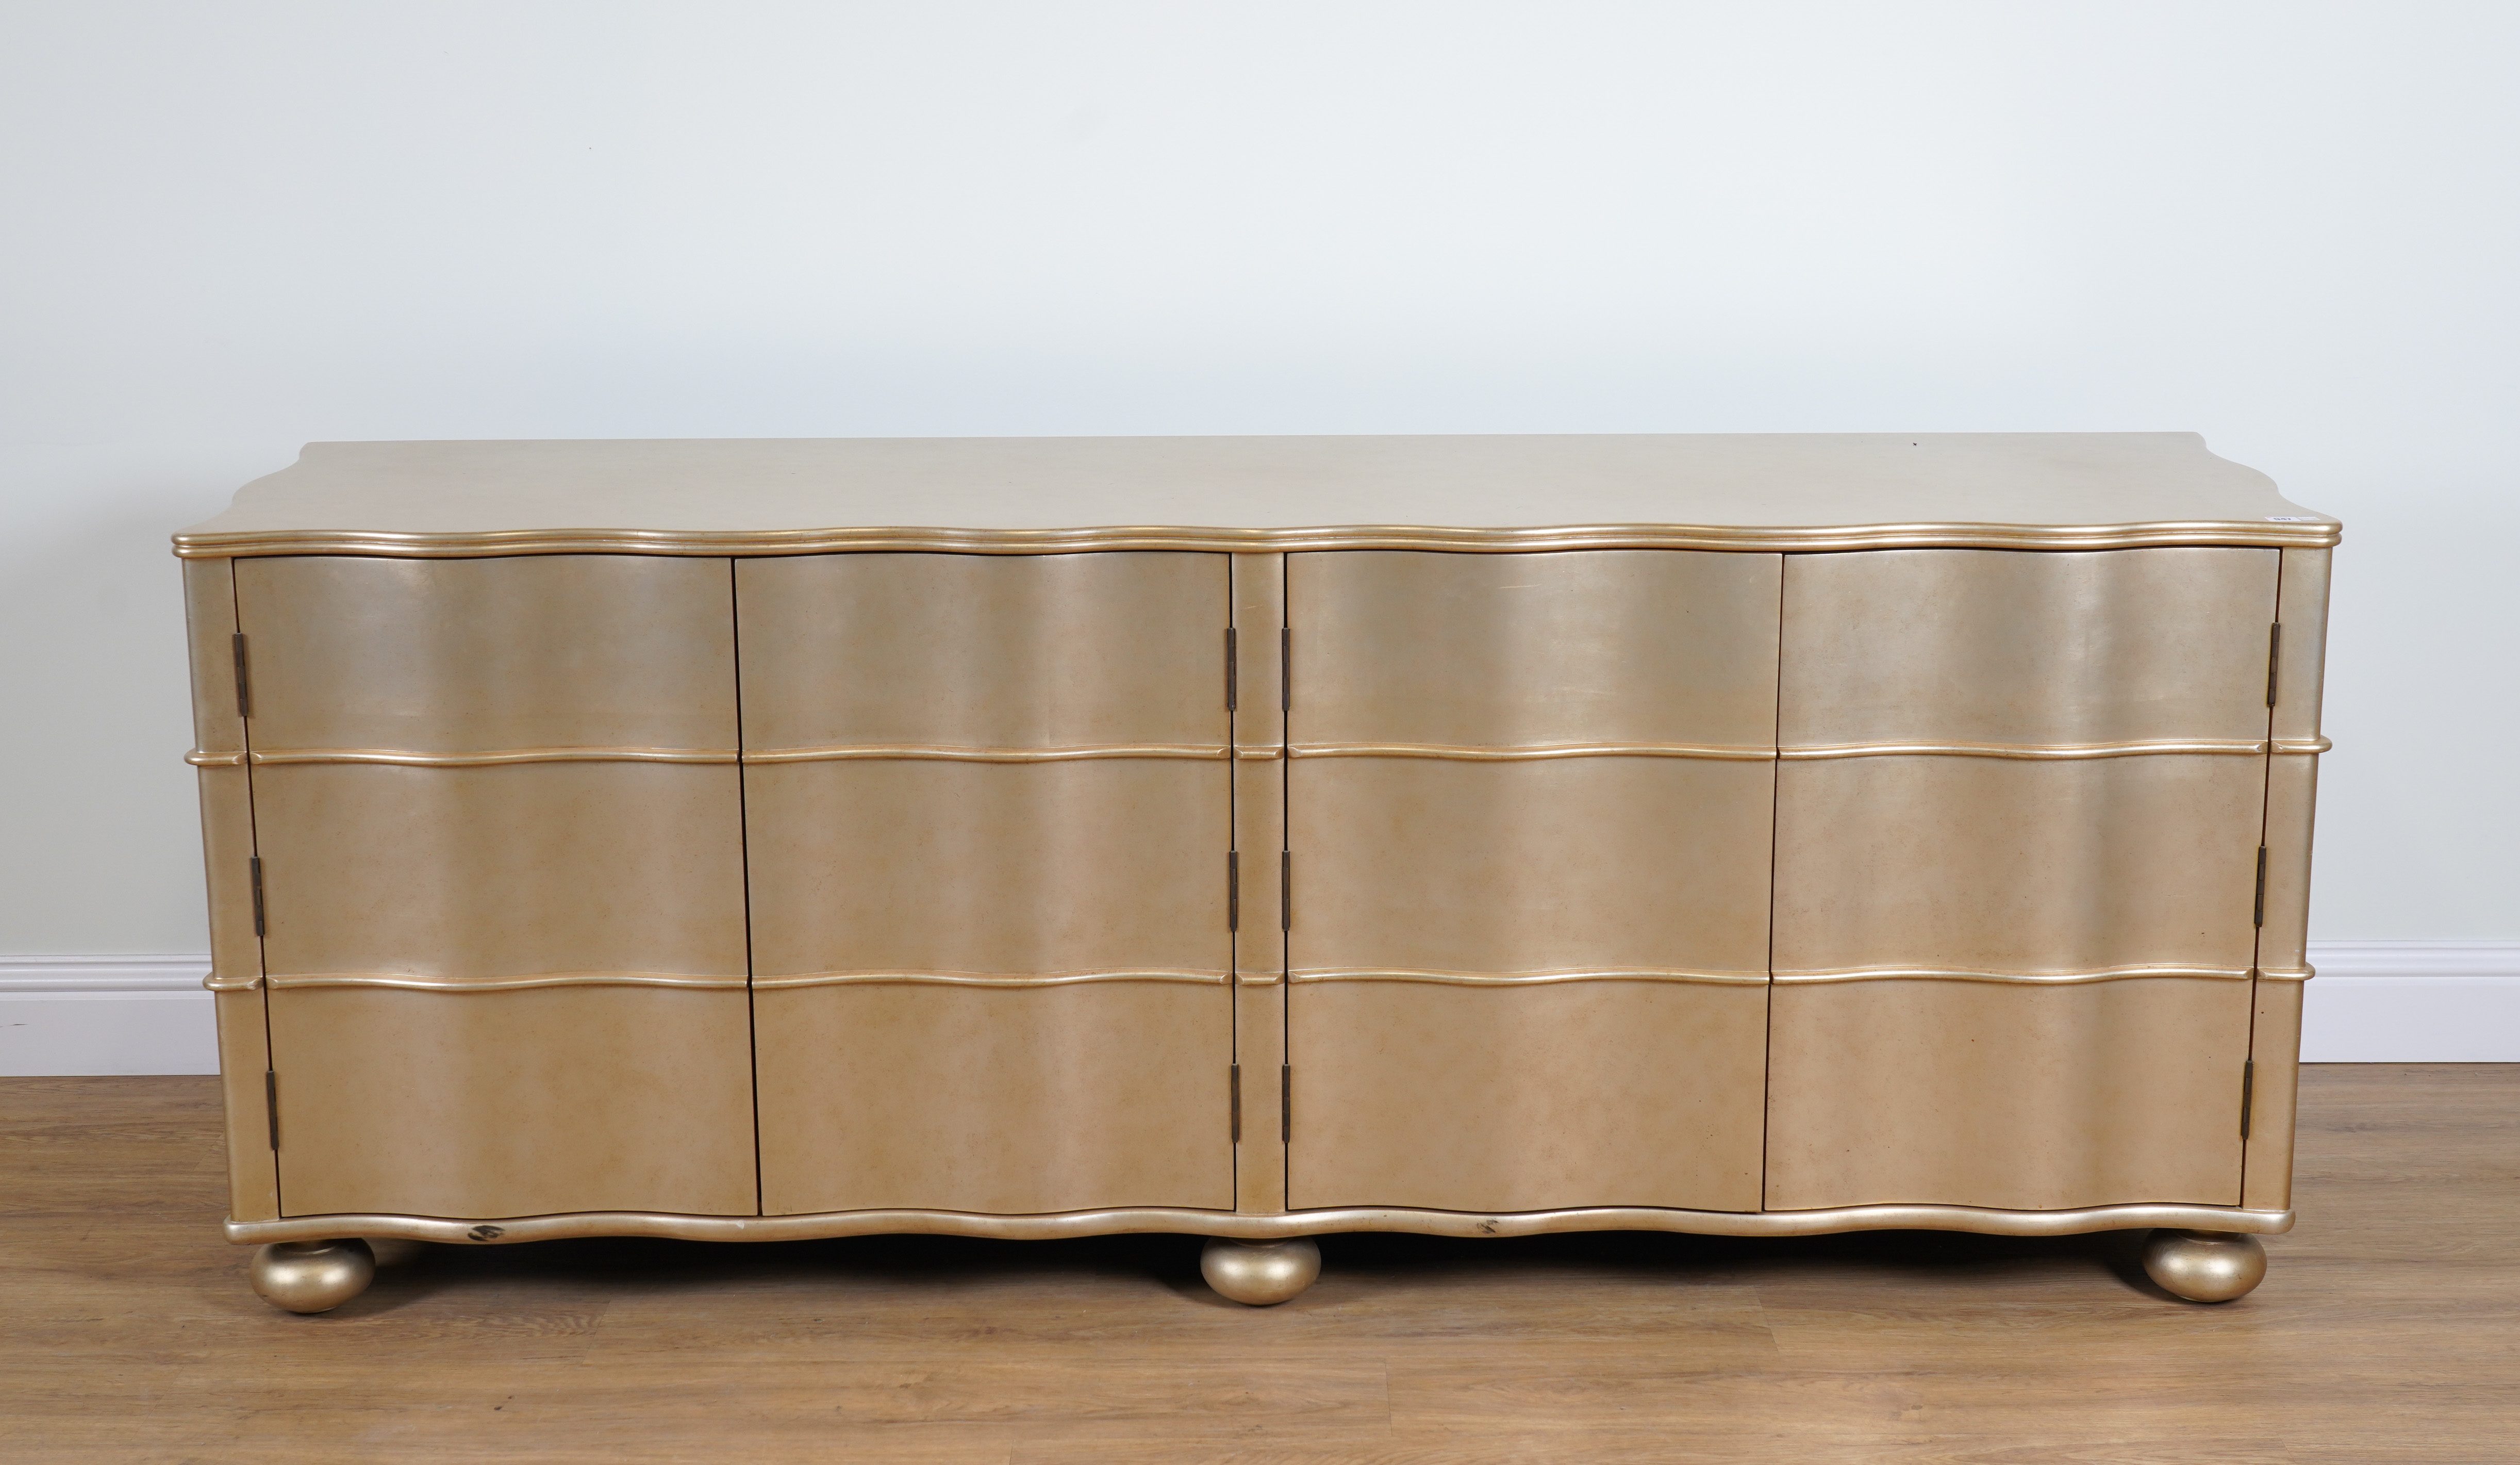 PAUL MARTIN; A GOLD PAINTED WAVY FRONTED FOUR DOOR LOW CABINET - Image 2 of 4